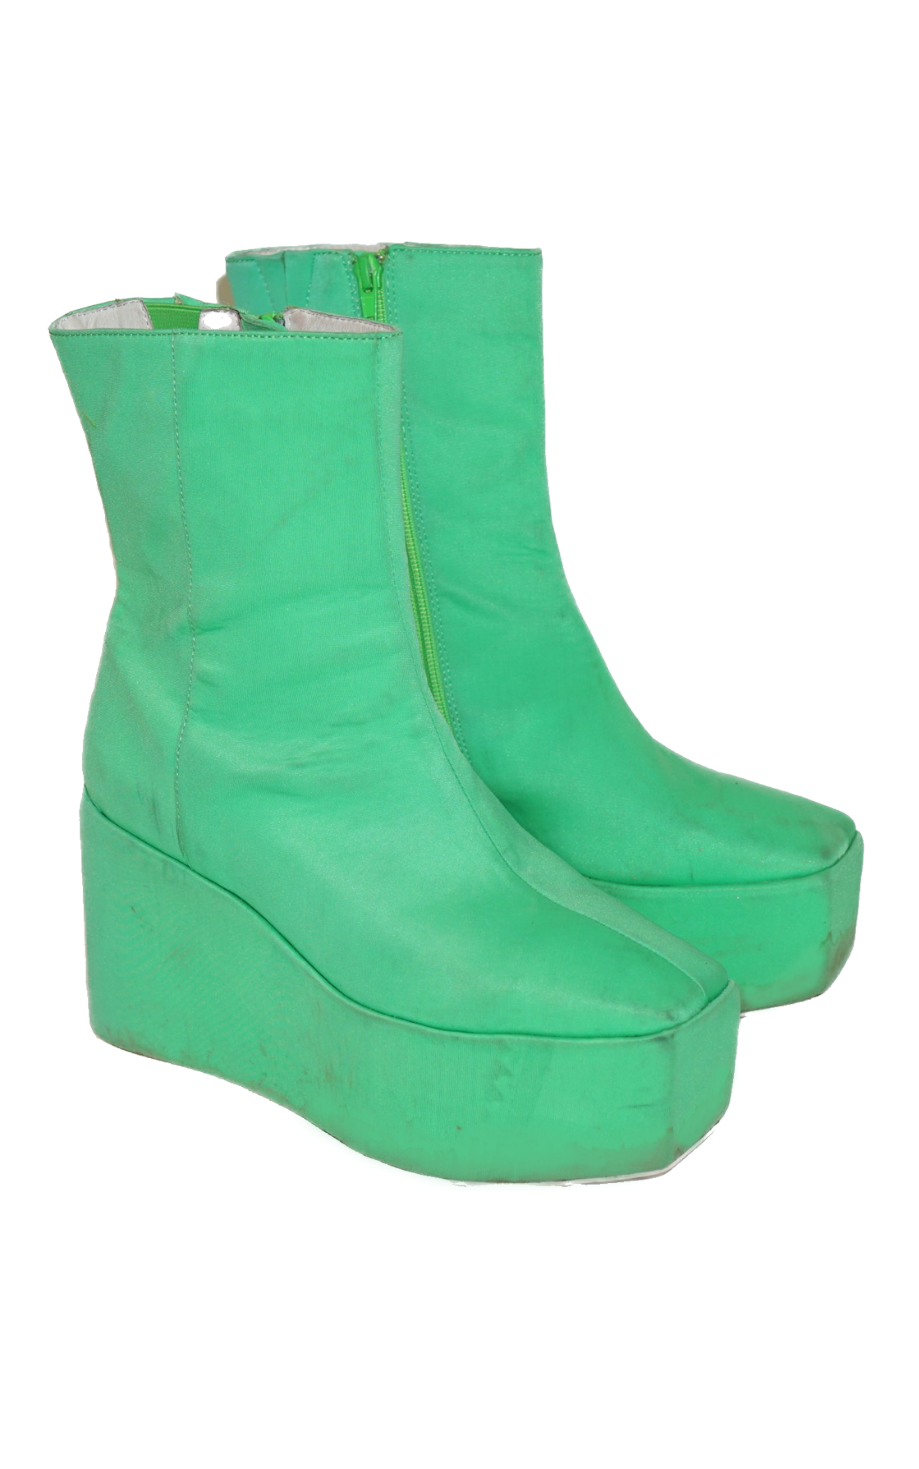 JEFFREY CAMPBELL Neon Green Wedge Boots resellum